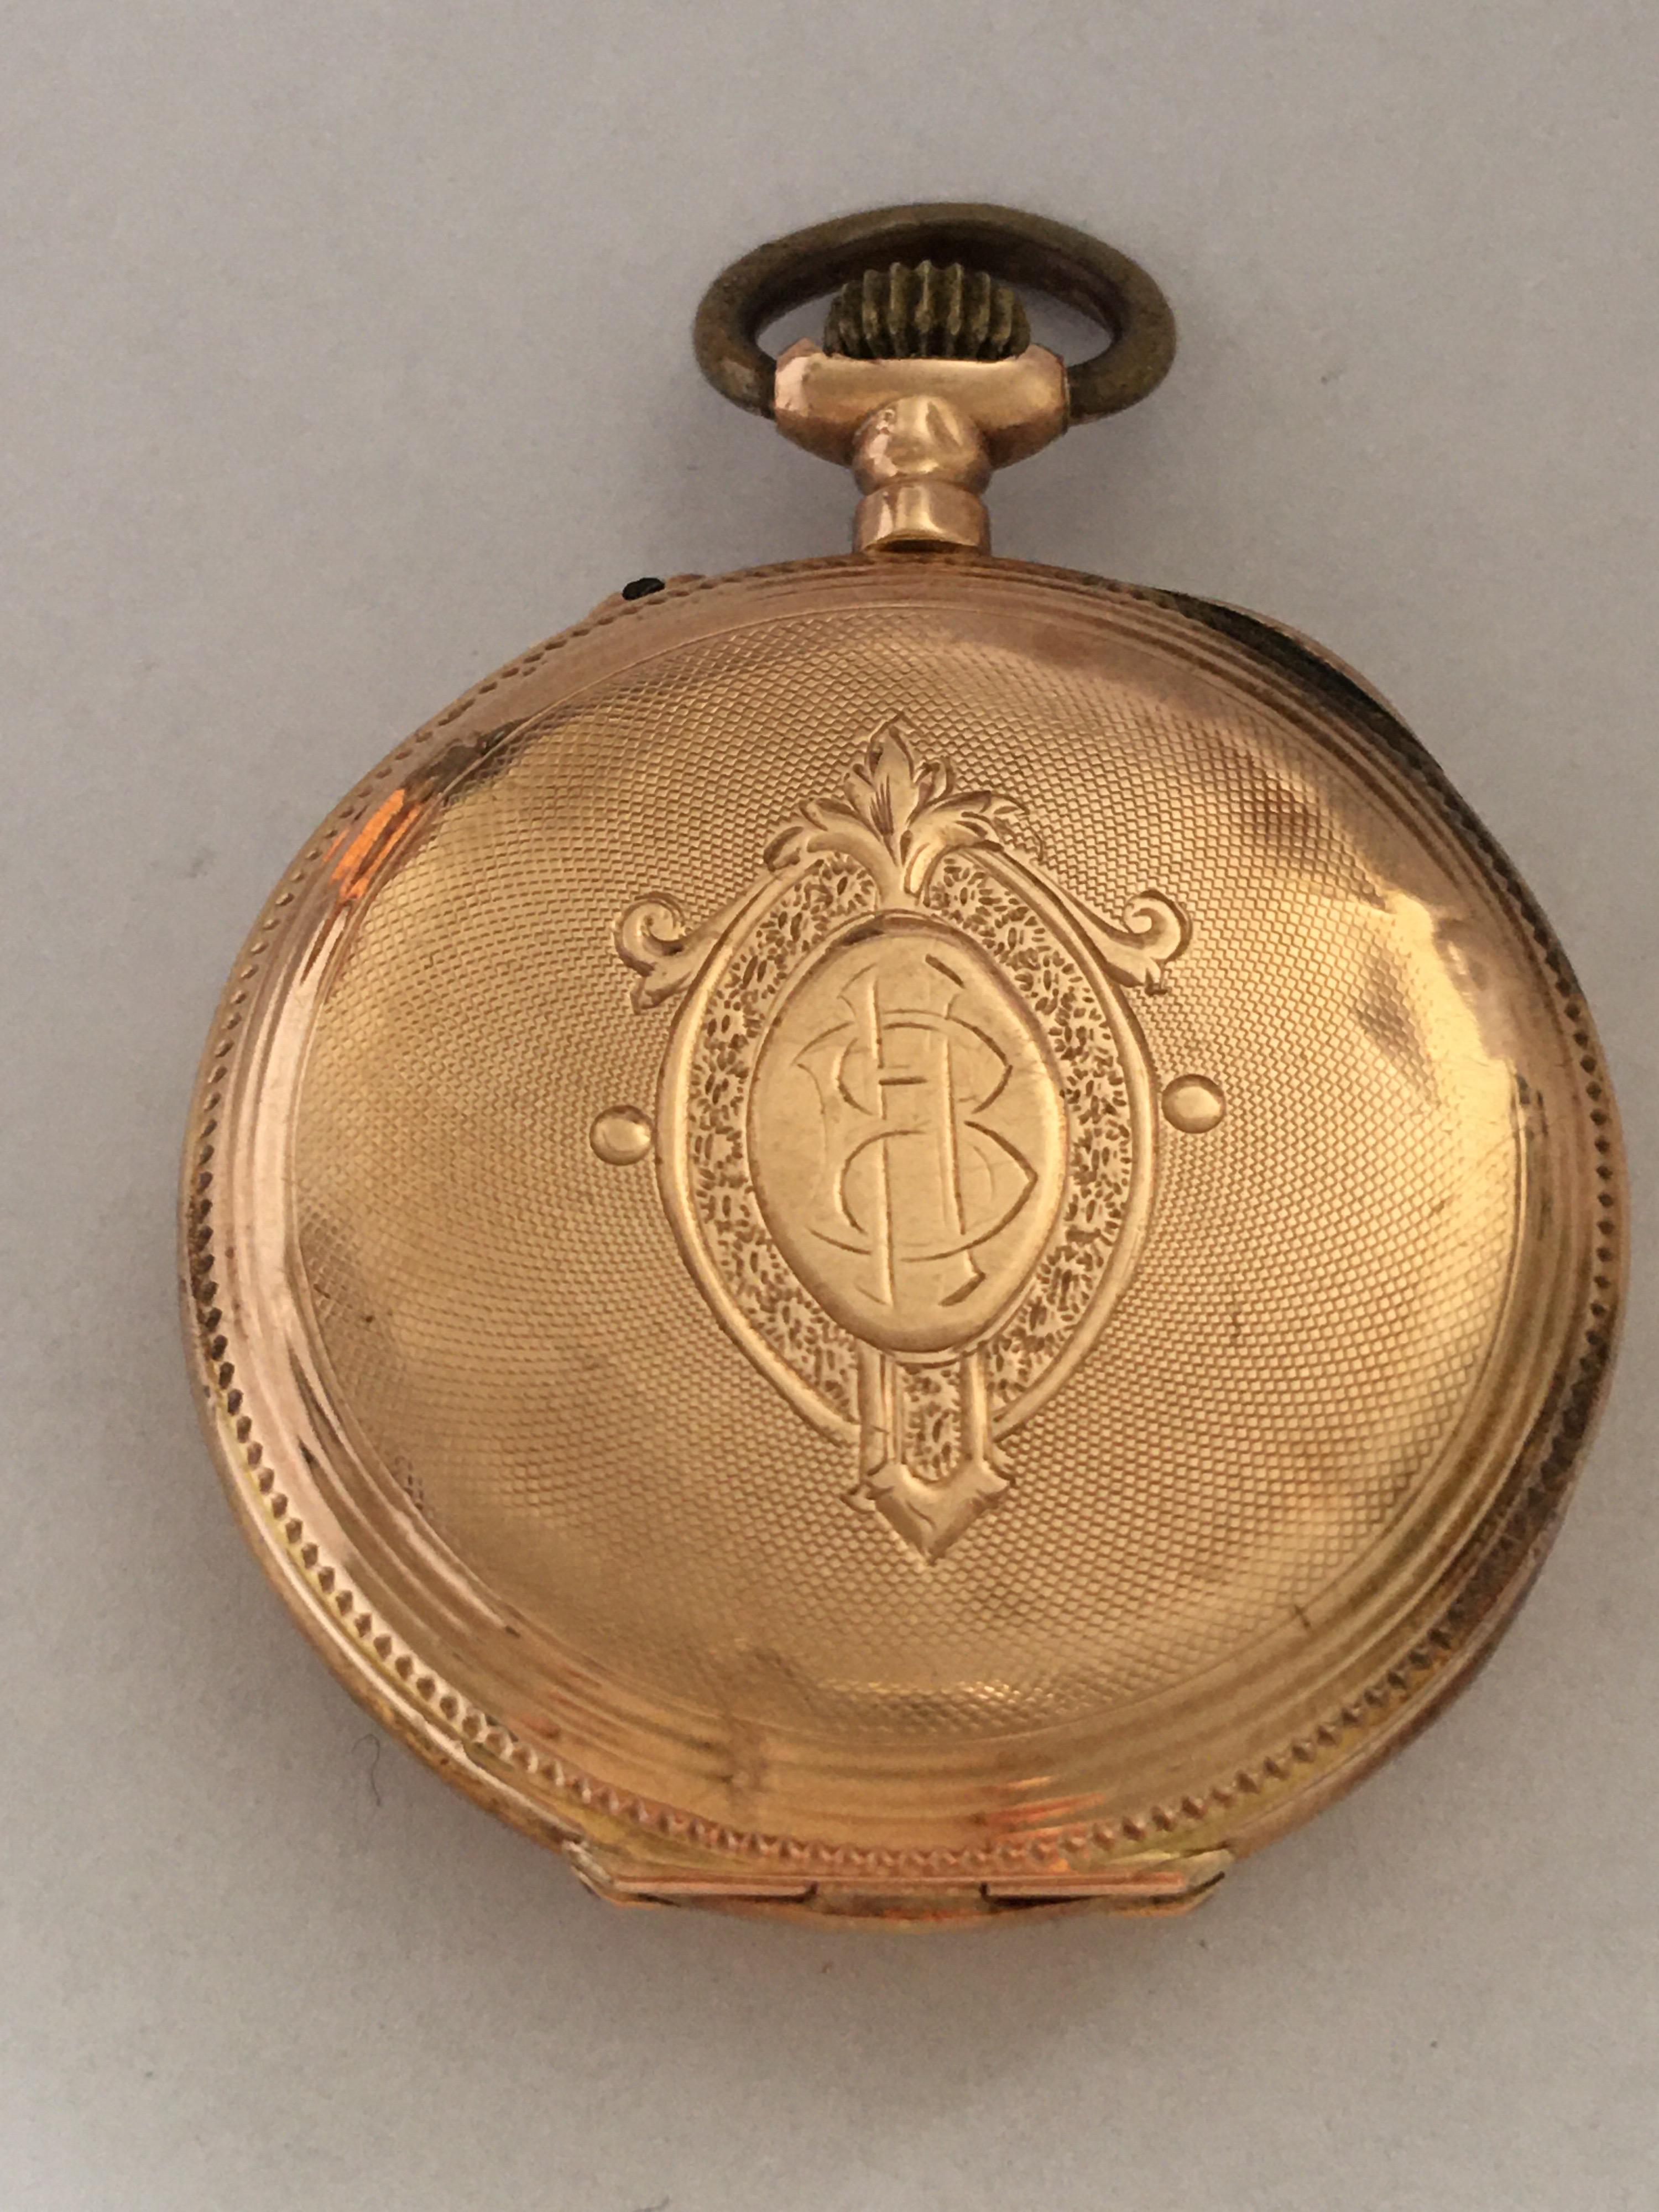 This beautiful antique little watch is working and it is ticking well. Visible dents on the side and back engine turned watch case as shown. 

Please study the images carefully as form part of the description.